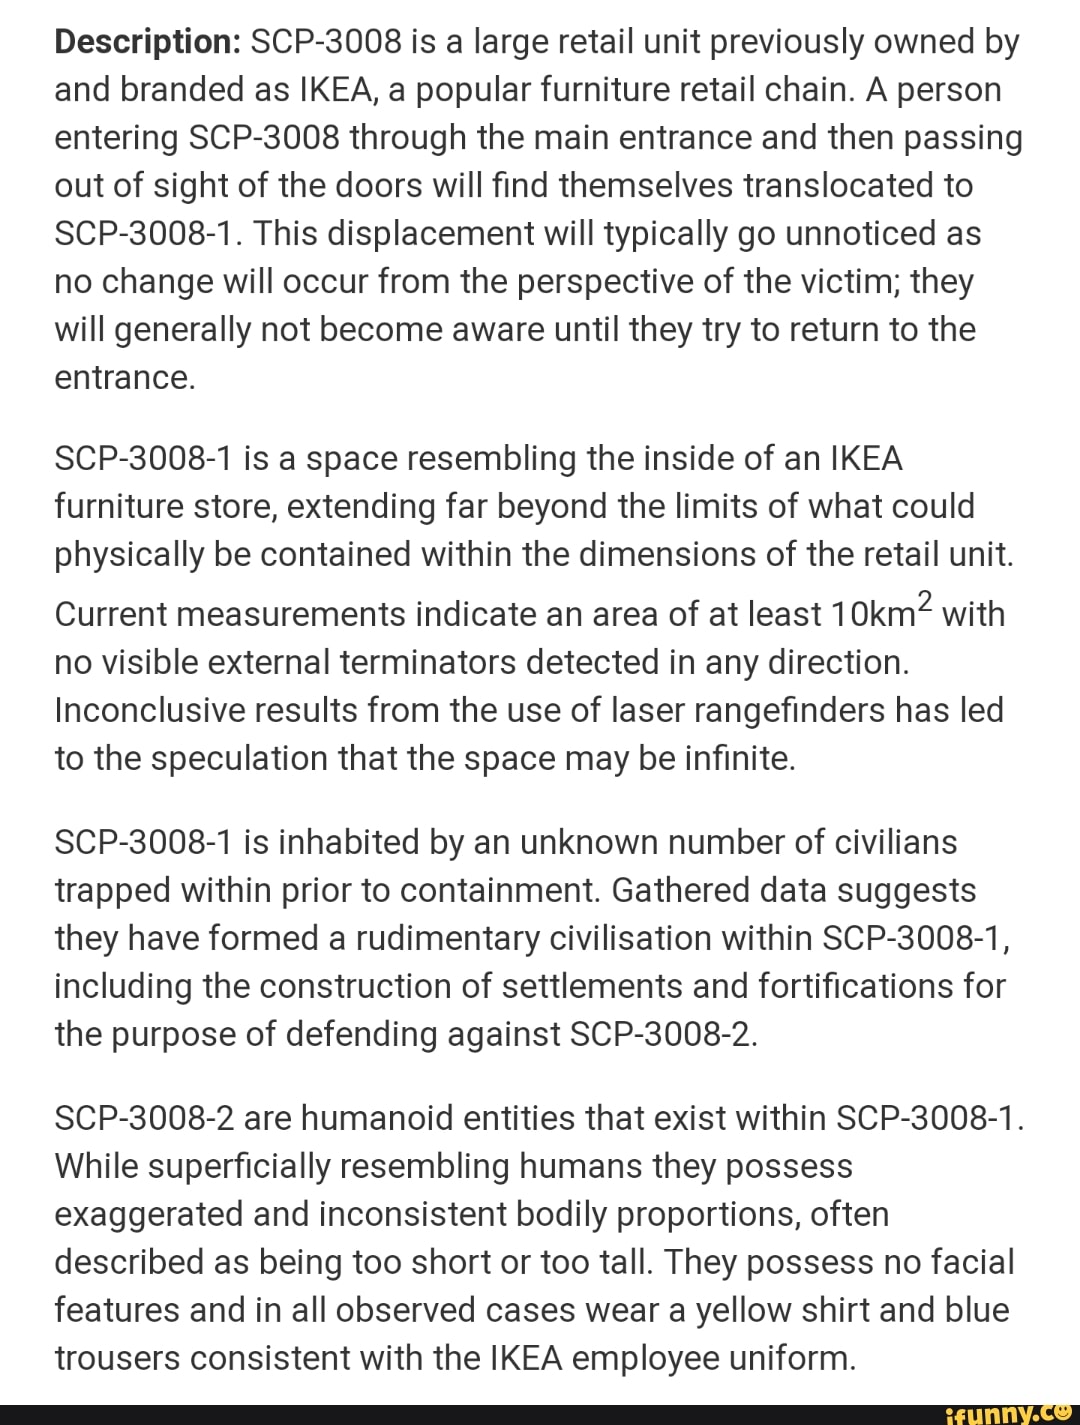 Description Scp 3008 Is A Large Retail Unit Previously Owned By And Branded As Ikea A Popular Furniture Retail Chain A Person Entering Scp 3008 Through The Main Entrance And Then Passing Out Of